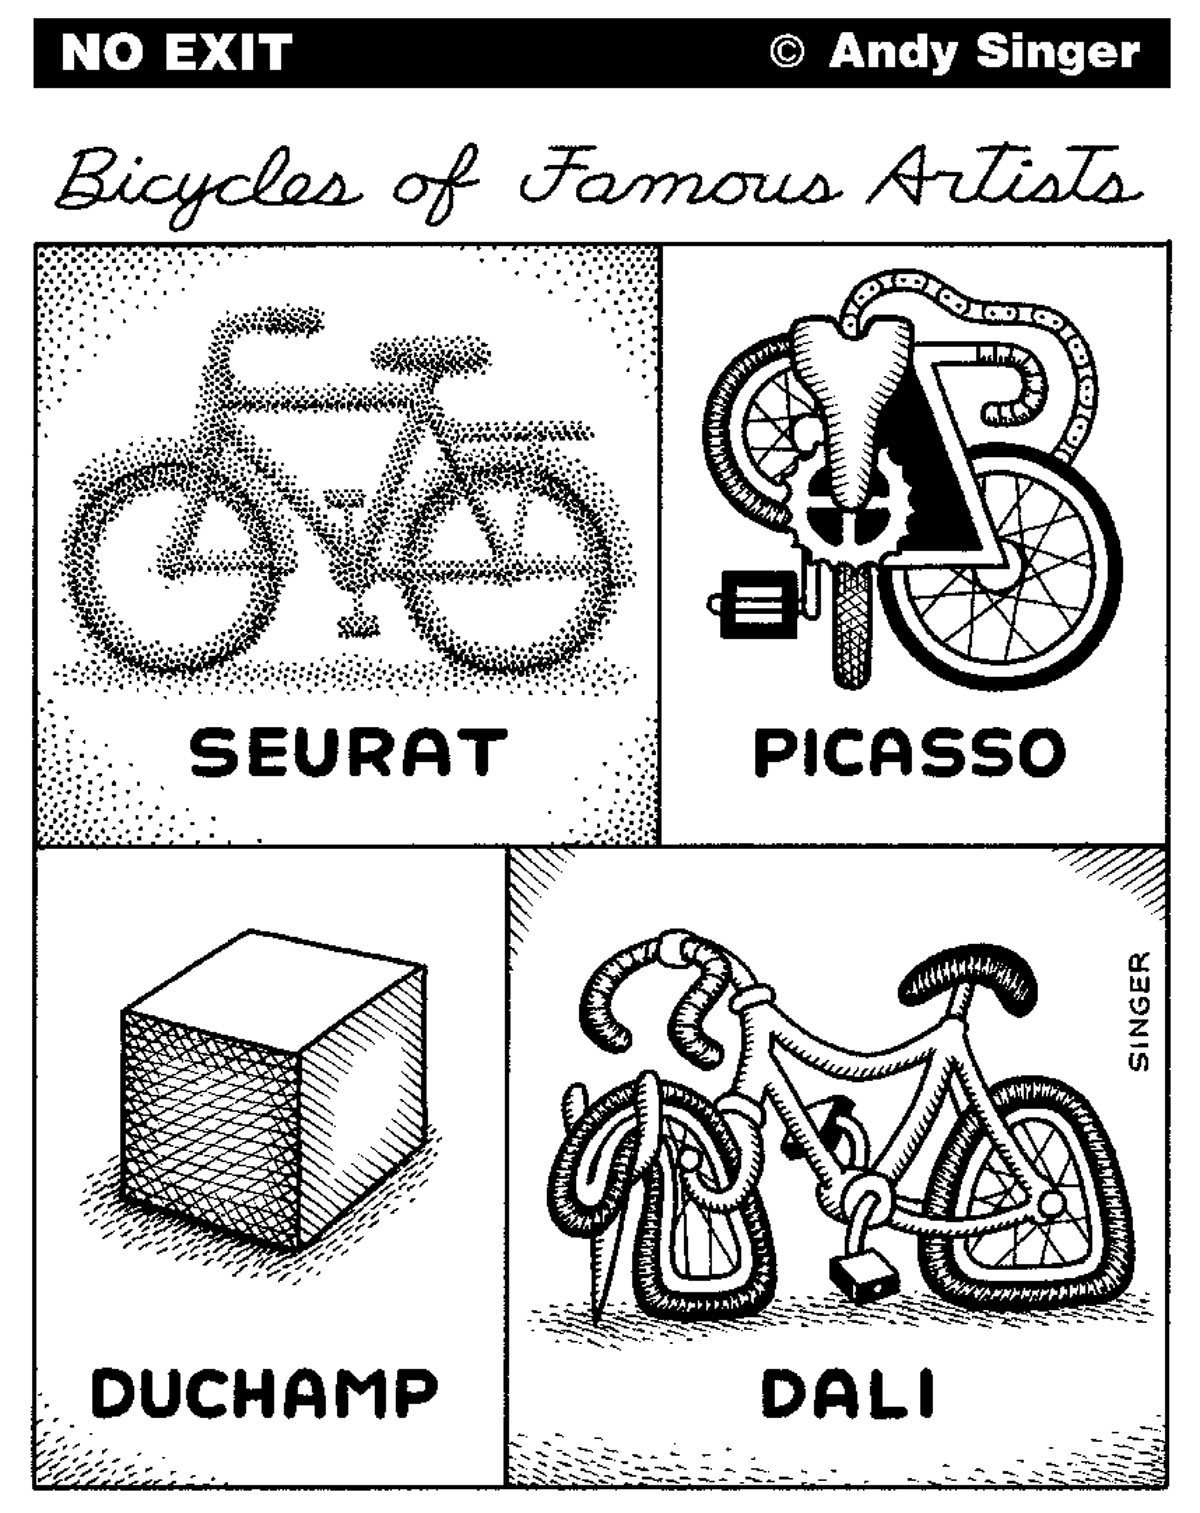 No Exit Cartoon: Bicycles of Famous Artists